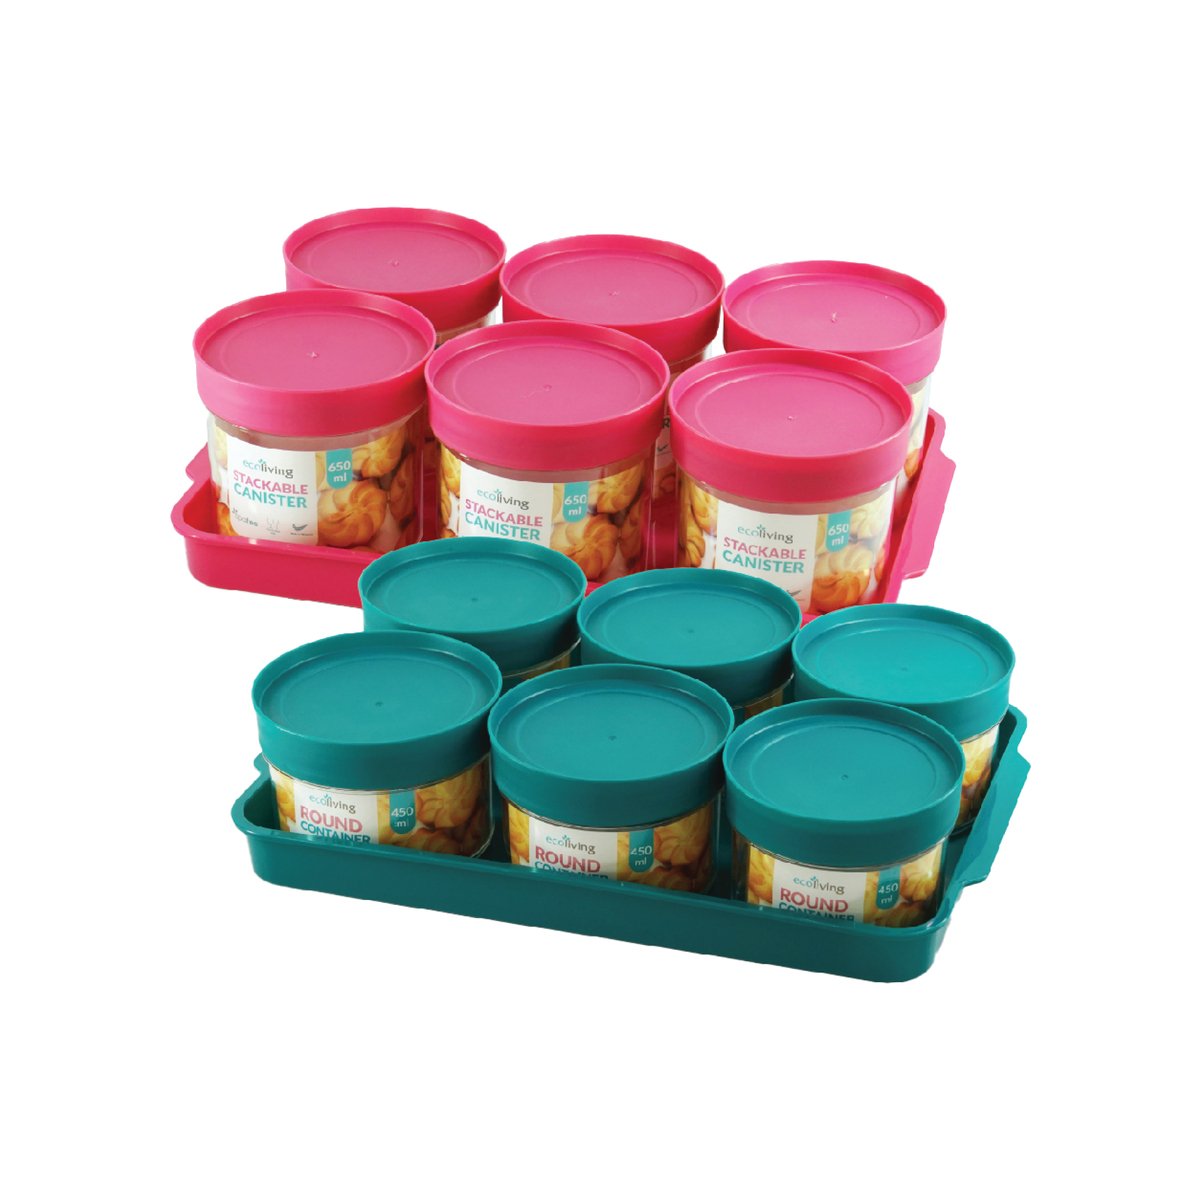 Eco Living 6's Canister Tray 1703/TQ